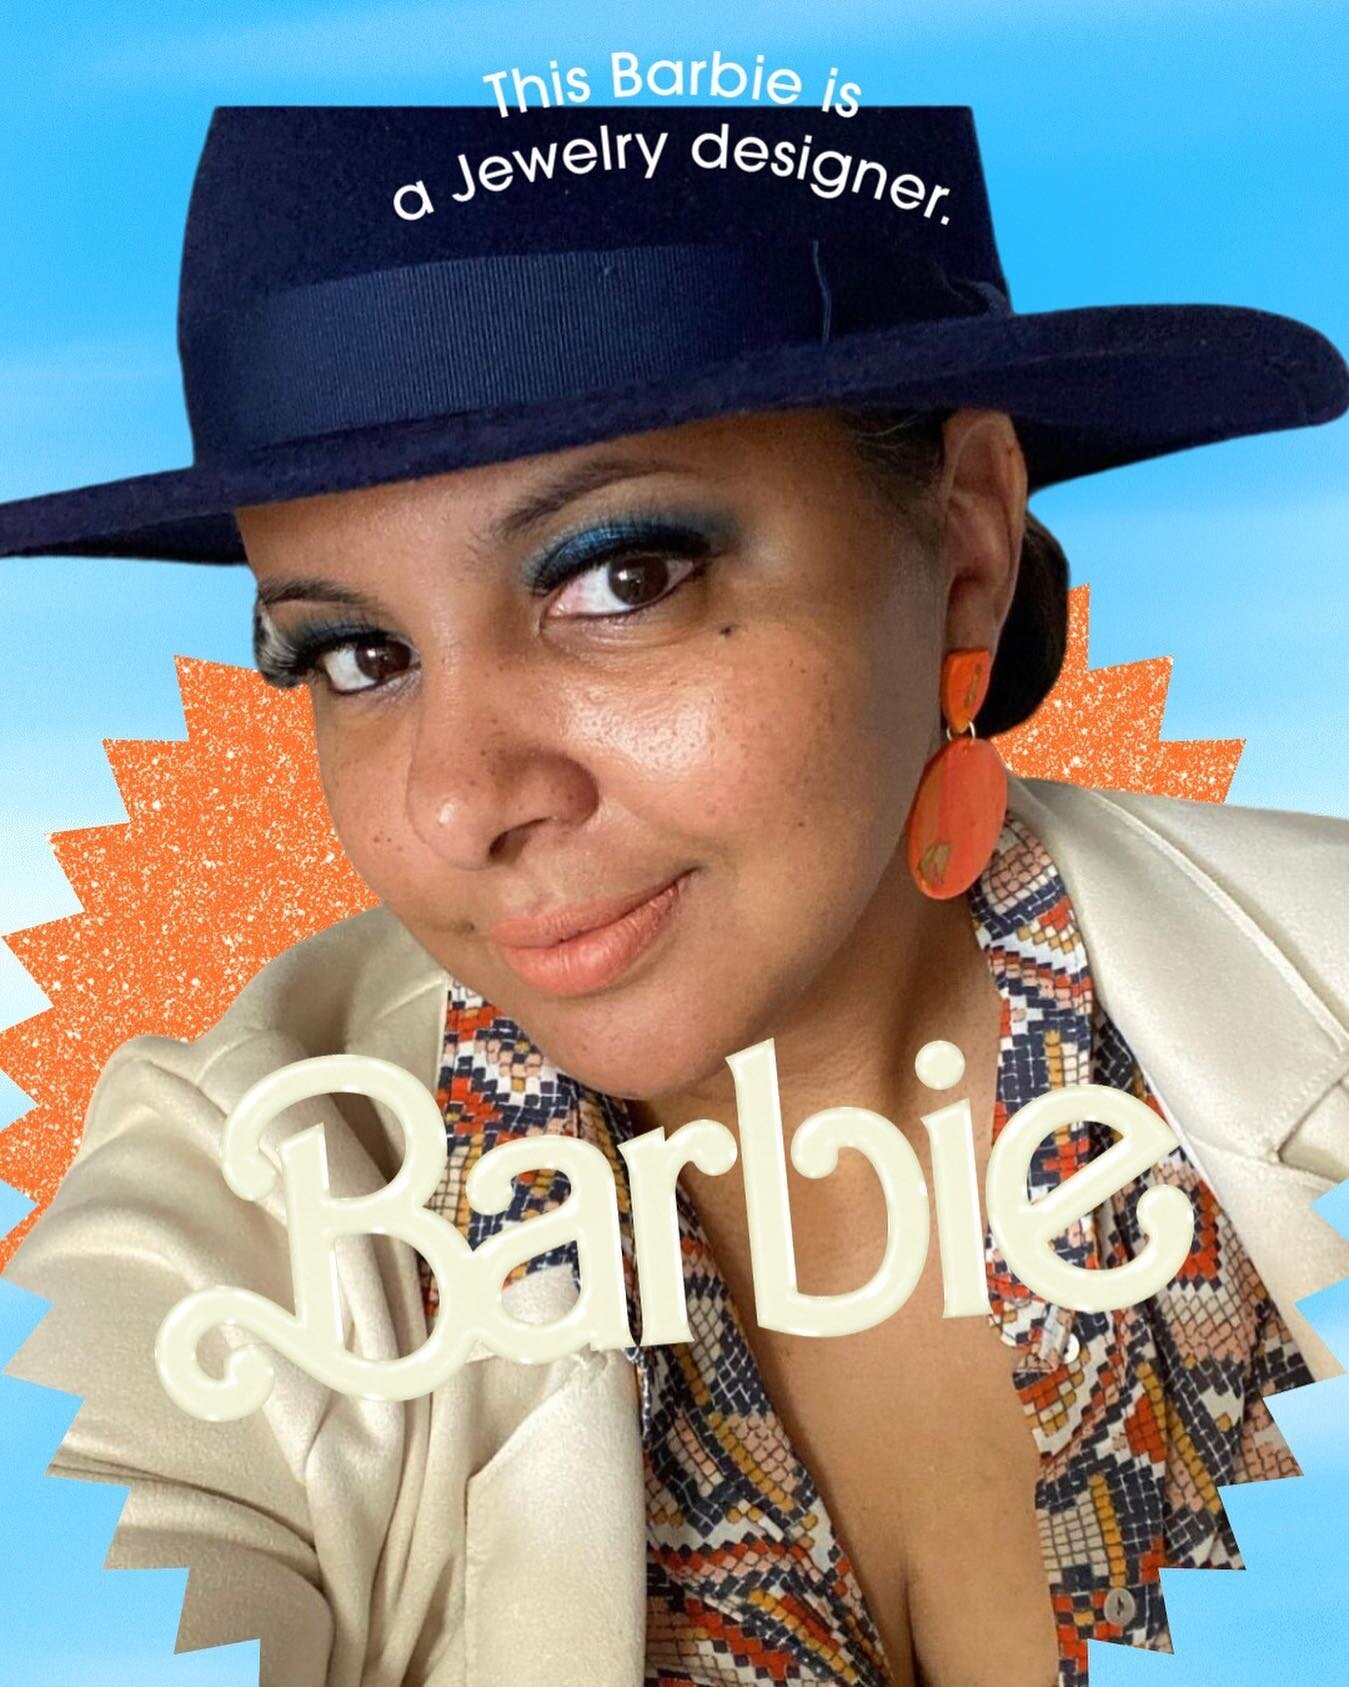 Meet Barbie Glen 🤣🧡. I wanted to do this since the meme came out 🤣 Thank you @simplyartrageous for the link 🧡 ⁣
.⁣
.⁣
.⁣
.⁣
.⁣
#barbiemovie #barbiethemovie #barbie